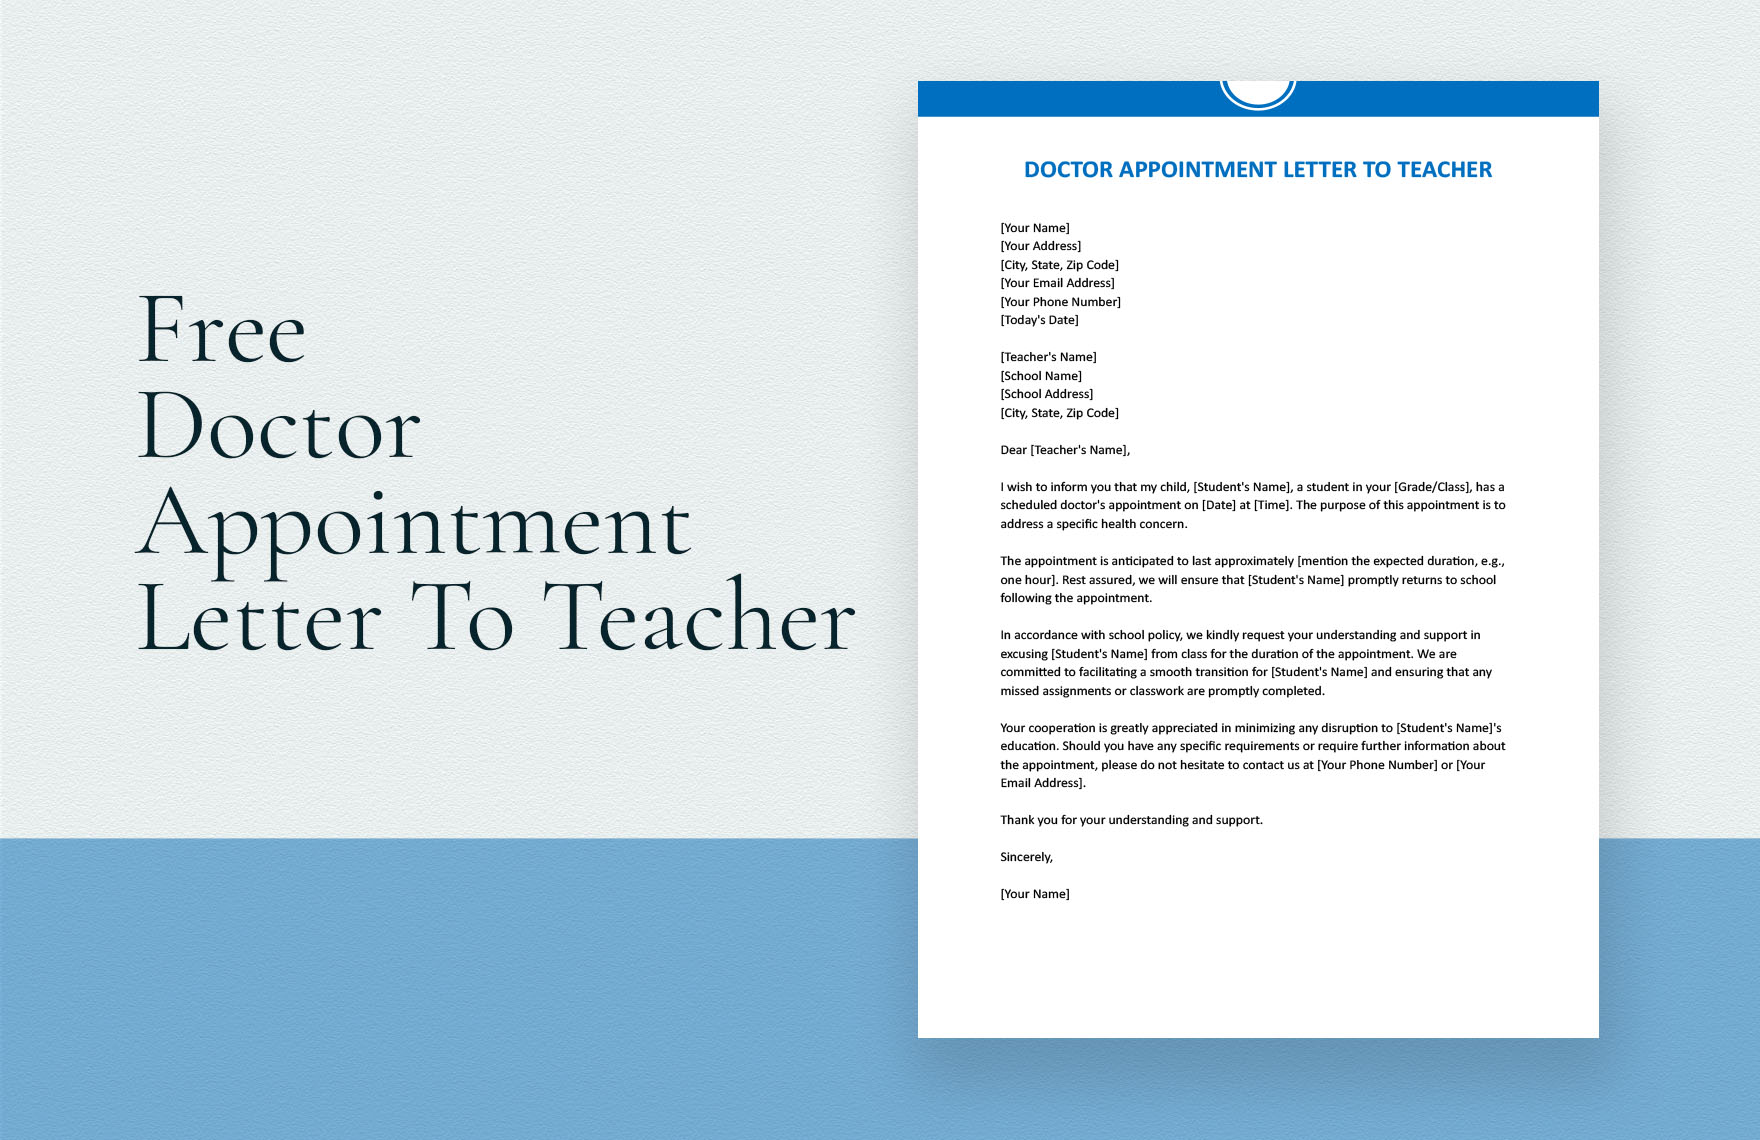 Doctor Appointment Letter To Teacher in Word, Google Docs